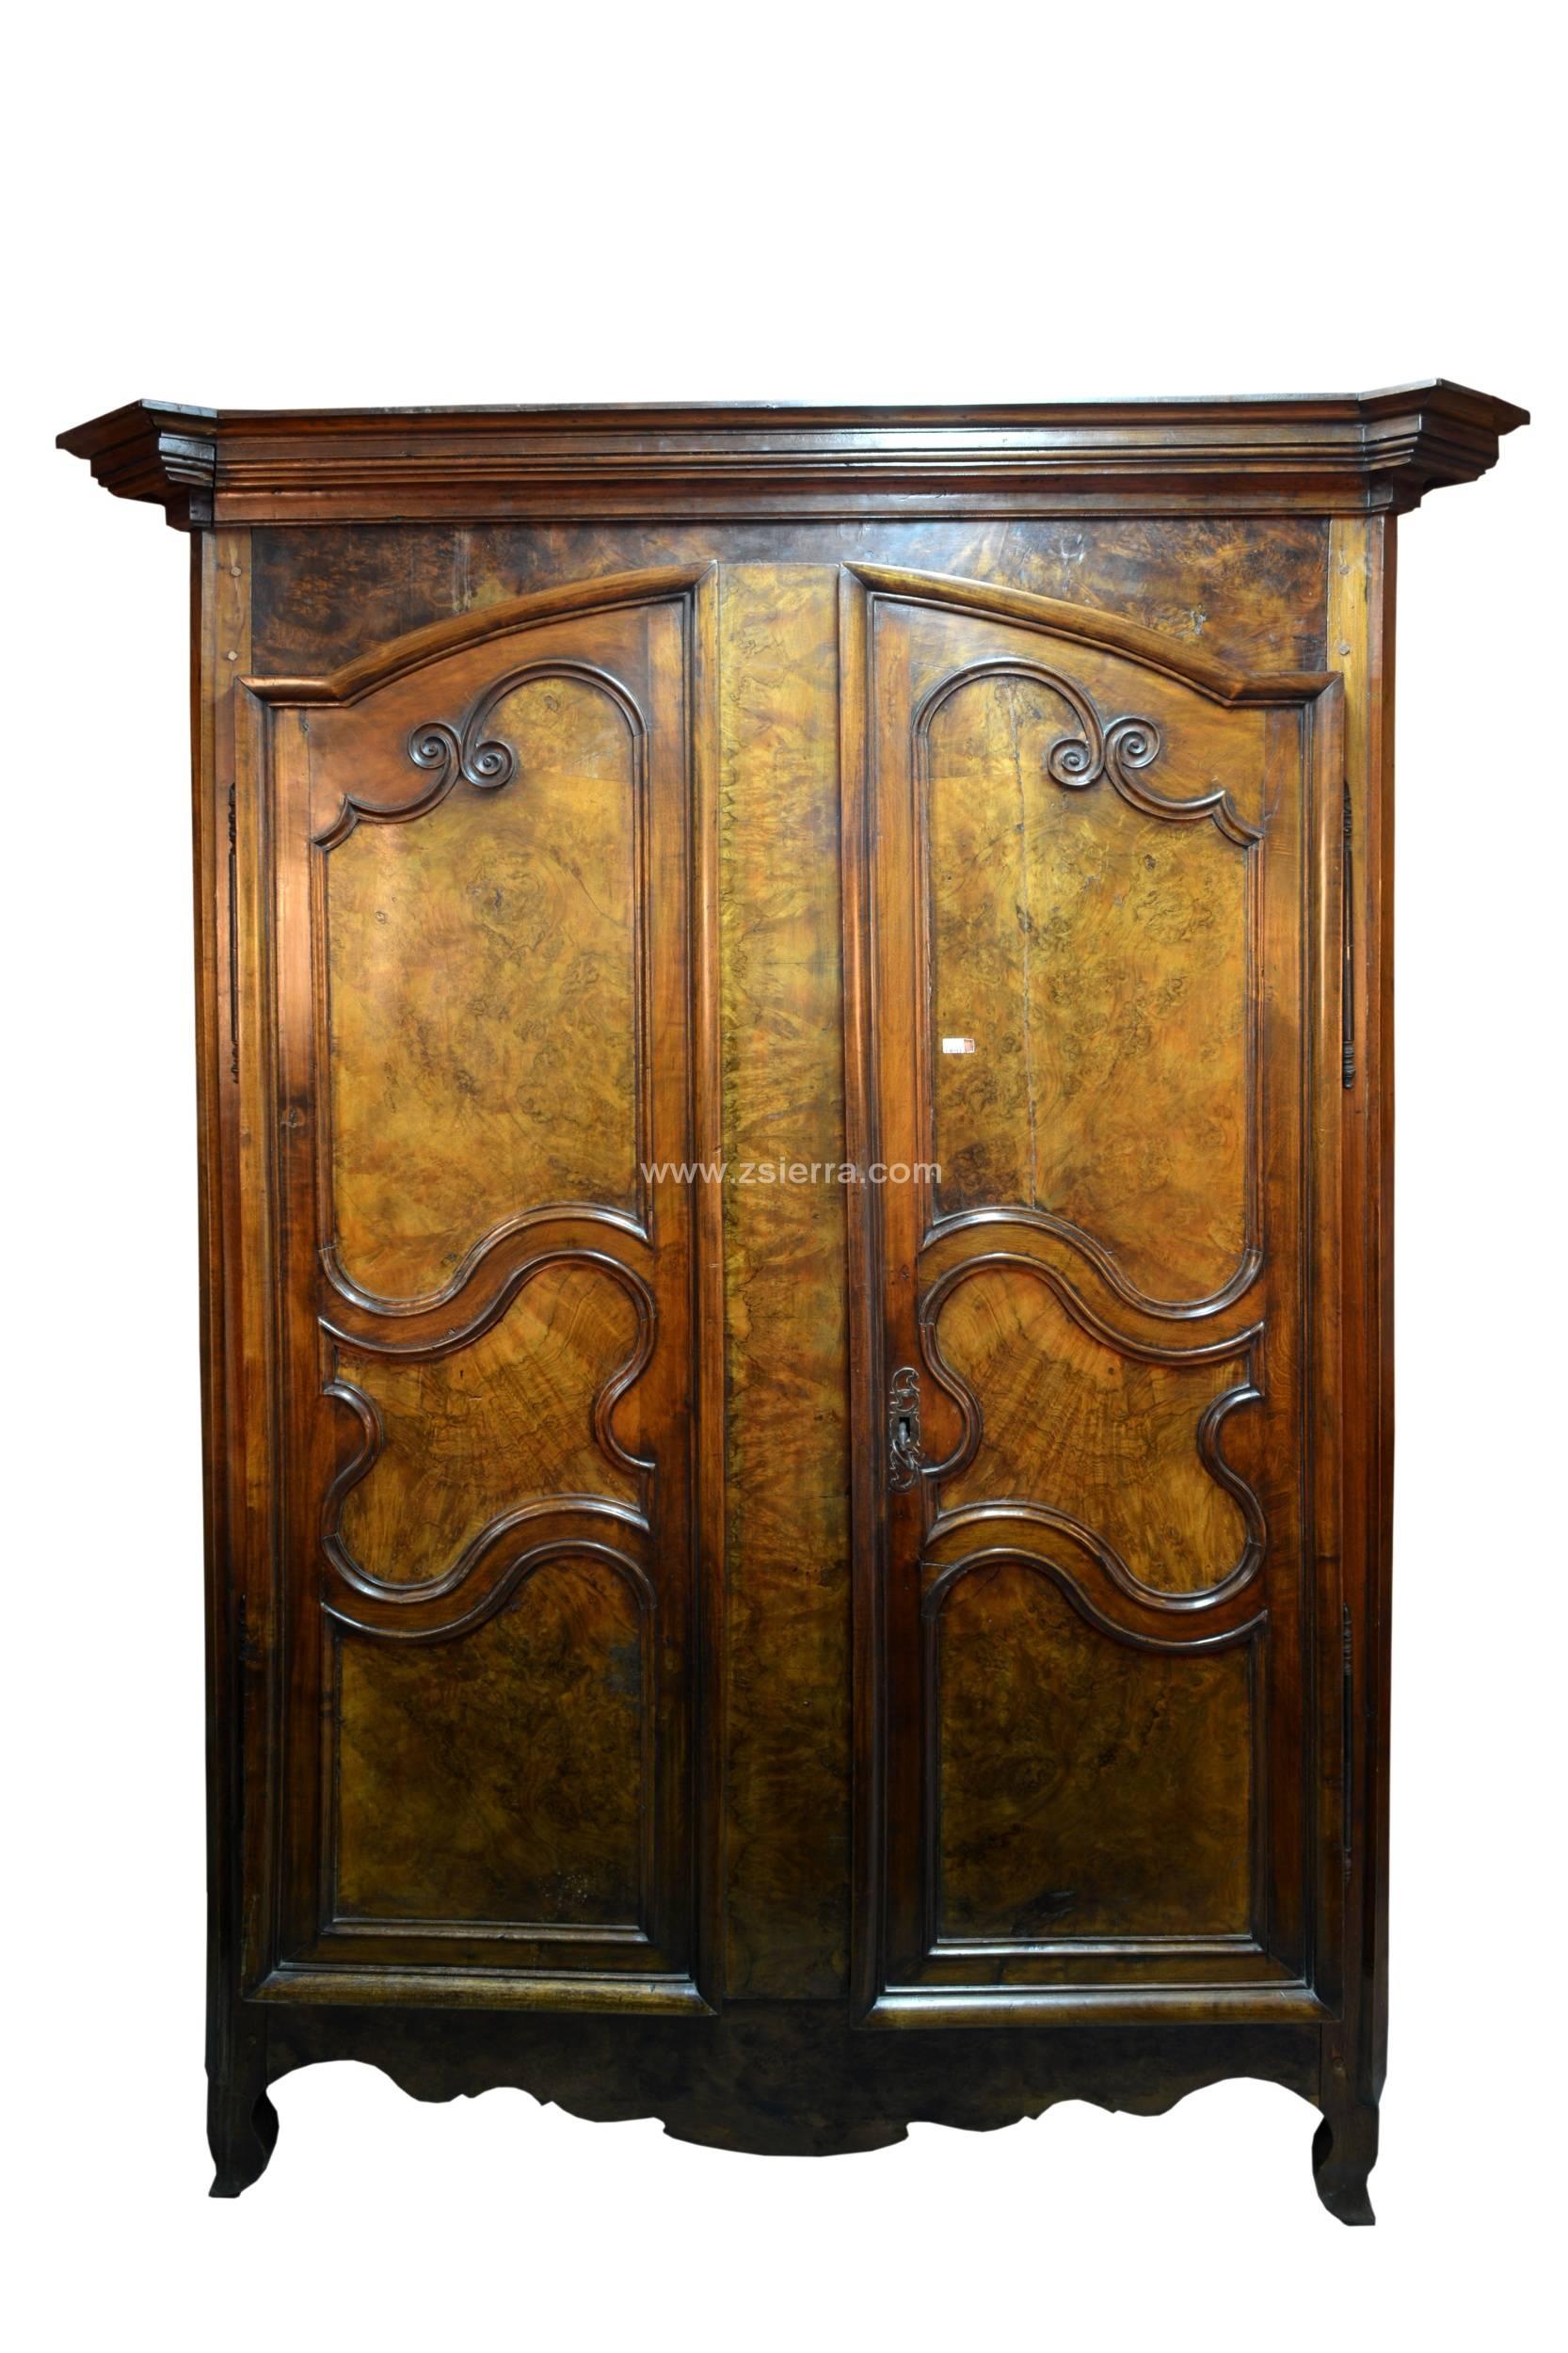 Two-door closet with key lock and decorated lock shield that has a strong moldings on the top, others very delicate and curved in the doors and four legs and profiles curved in the lower. The decoration of the doors places the work within the Rococo